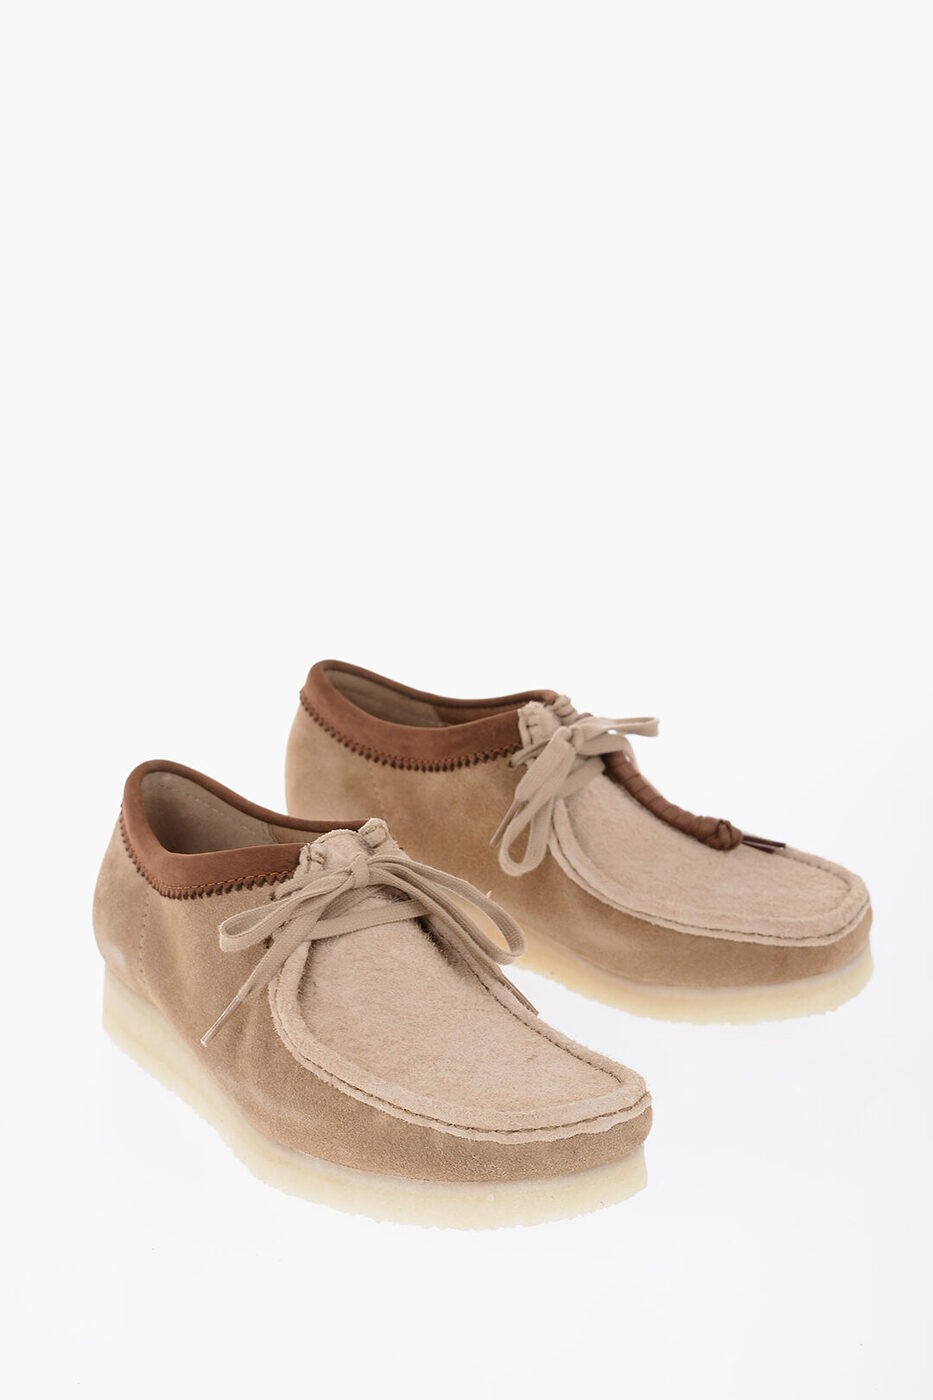 CLARKS クラークス ローファー 170538SUE SA メンズ ORIGINALS SUEDE WALLABEE LOAFERS WITH RUBBER SOLE 【関税 送料無料】【ラッピング無料】 dk